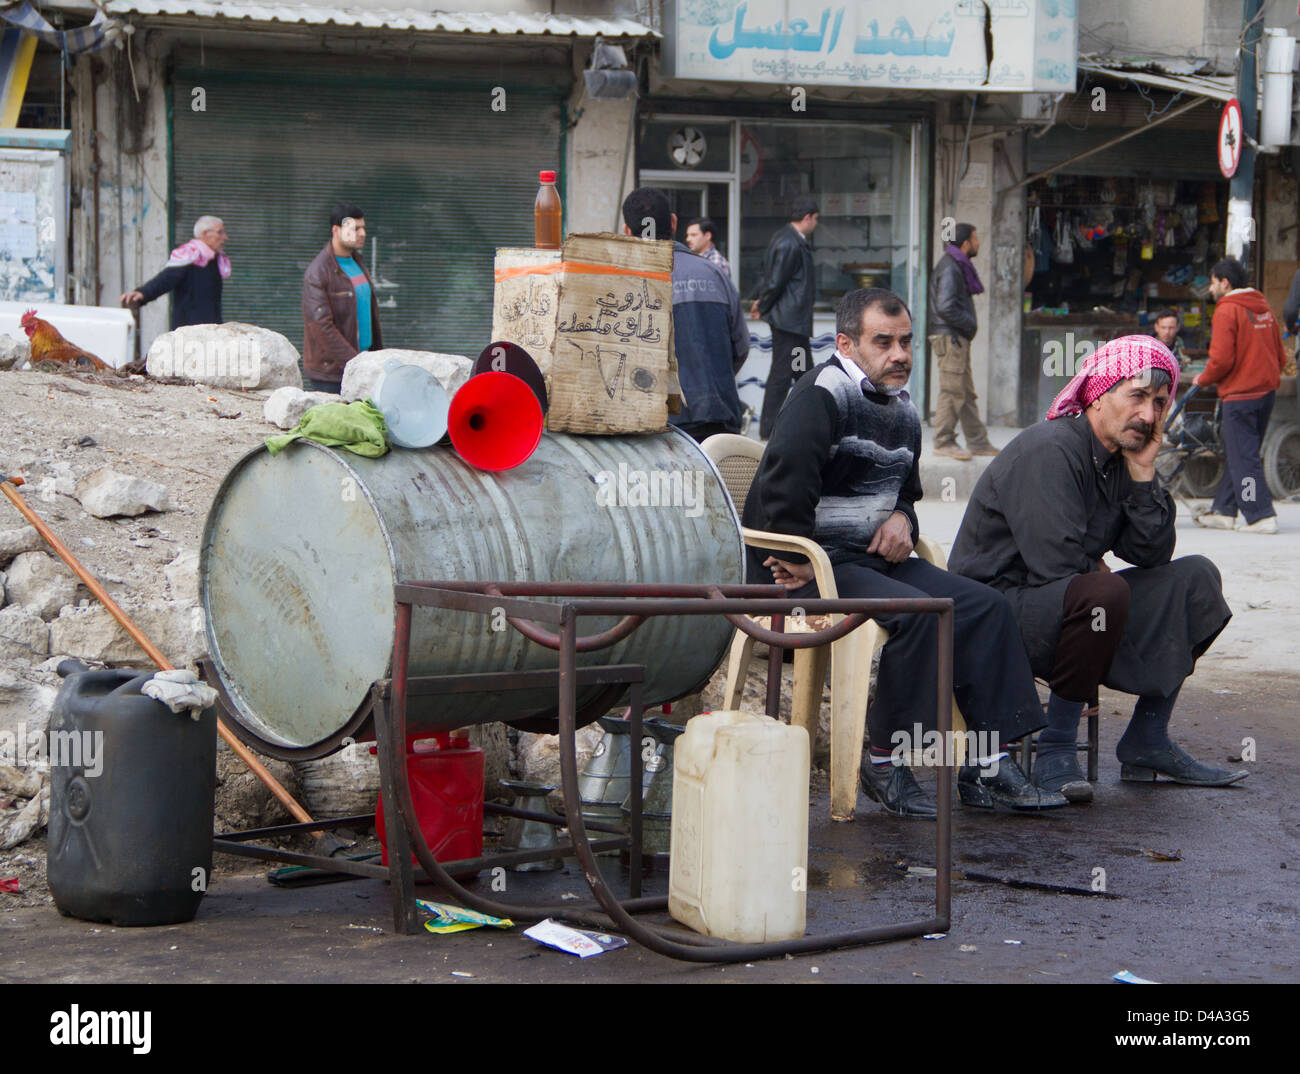 March 2, 2013 - Aleppo, Syria: Men sit at a gas station in the Marge section of Aleppo Syria on March 2, 2013. Stock Photo